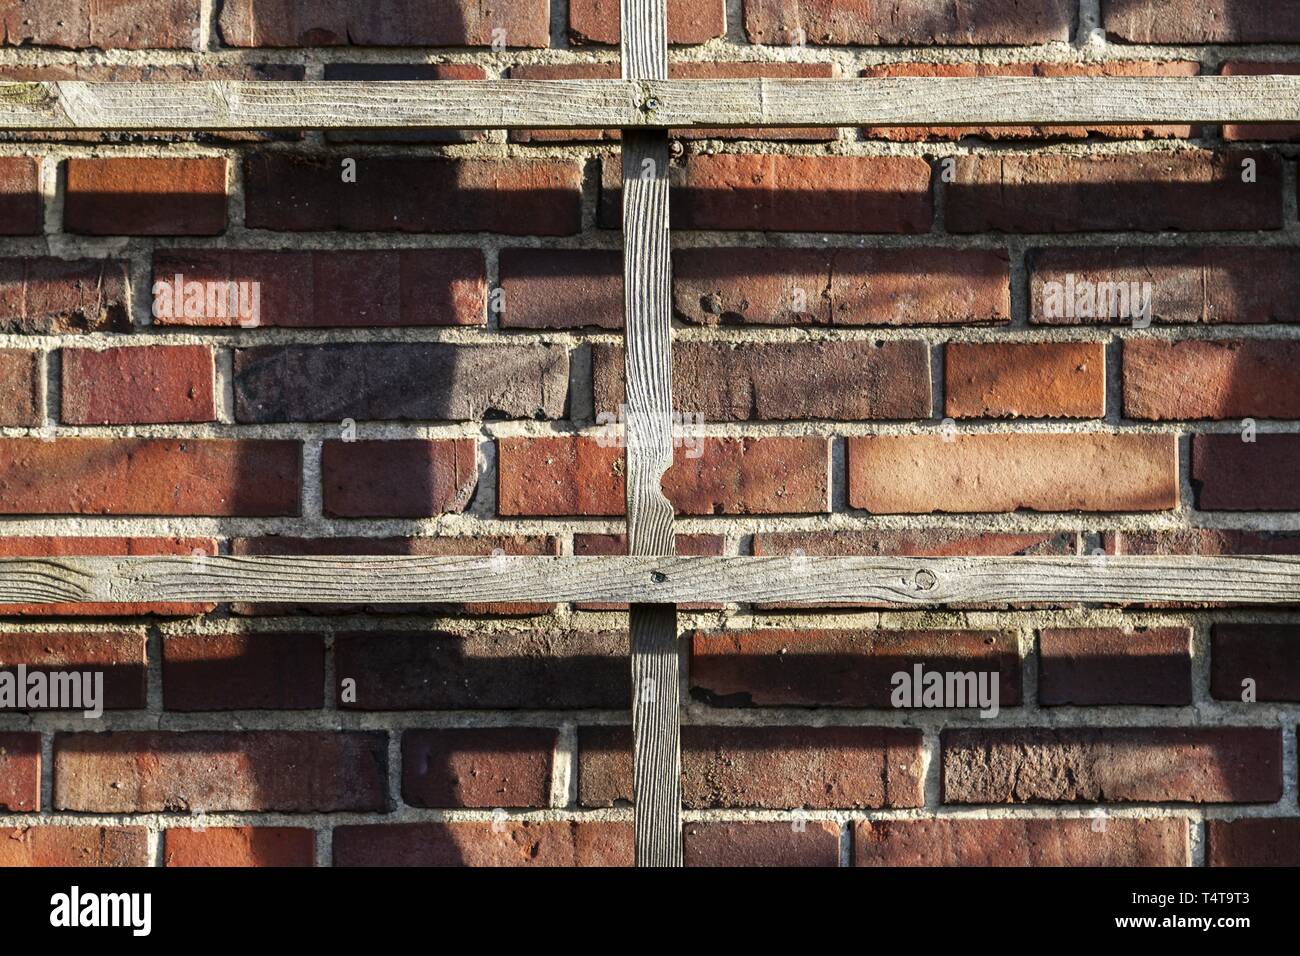 Wooden grid on brick wall Stock Photo